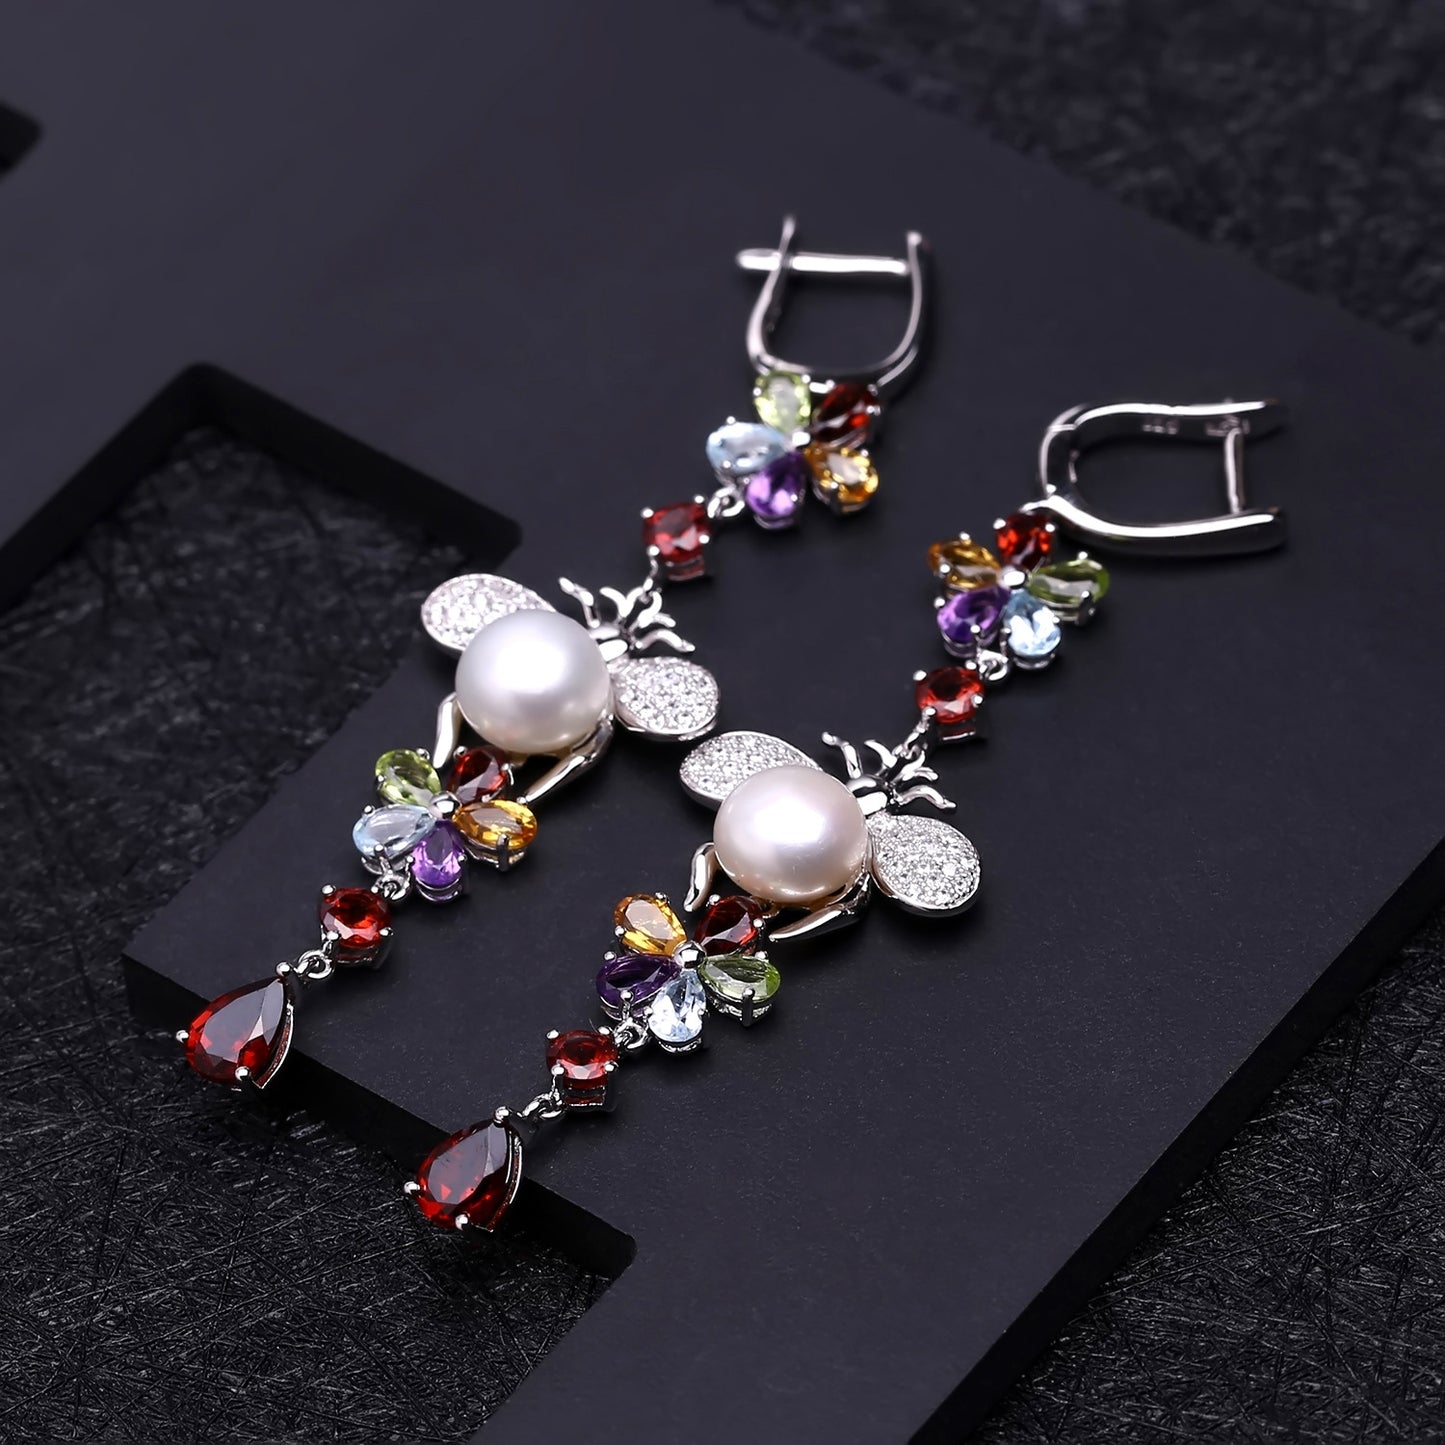 European Gemstones with Pearl Bee and Flower Design Silver Drop Earrings for Women